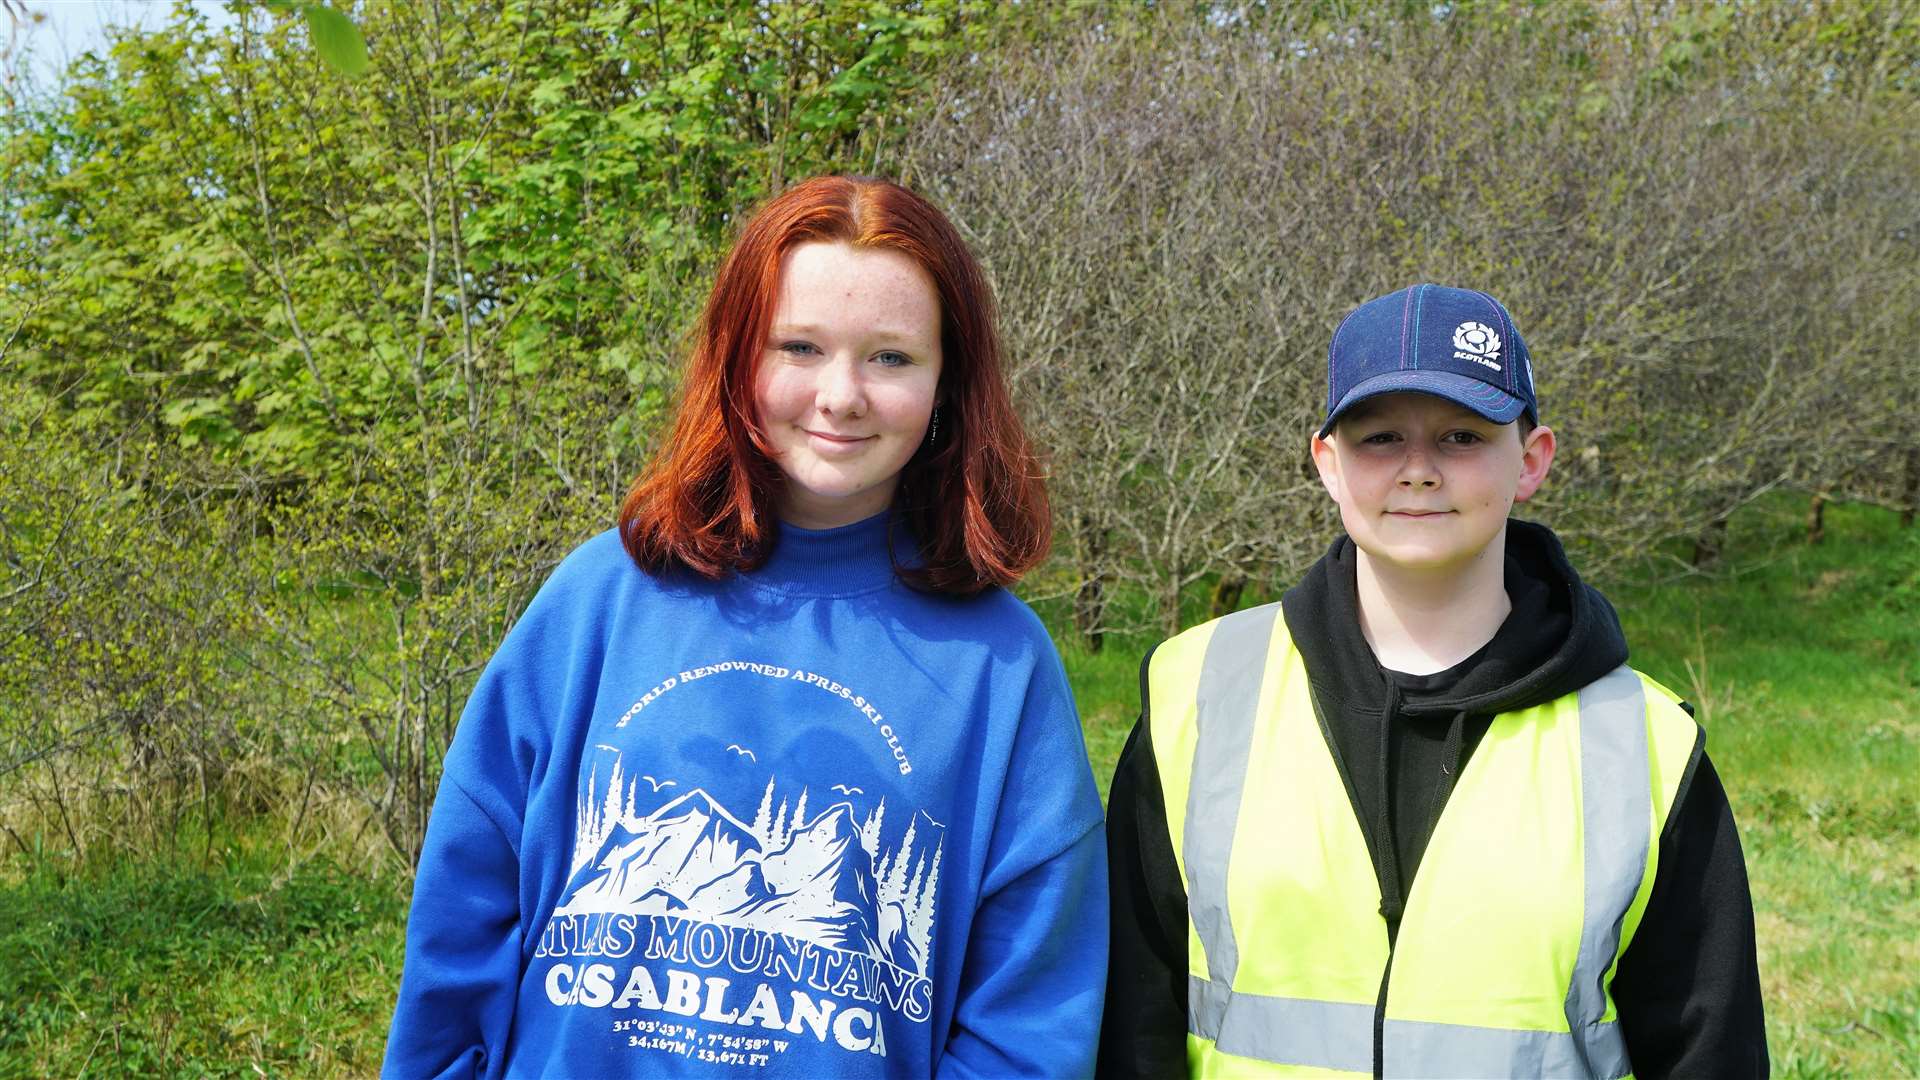 Miriam Hulse and Aidan Ferrier volunteer at Dunnet Community Forest on Sundays and were helping at the event by handing out leaflets and giving advice. Picture: DGS